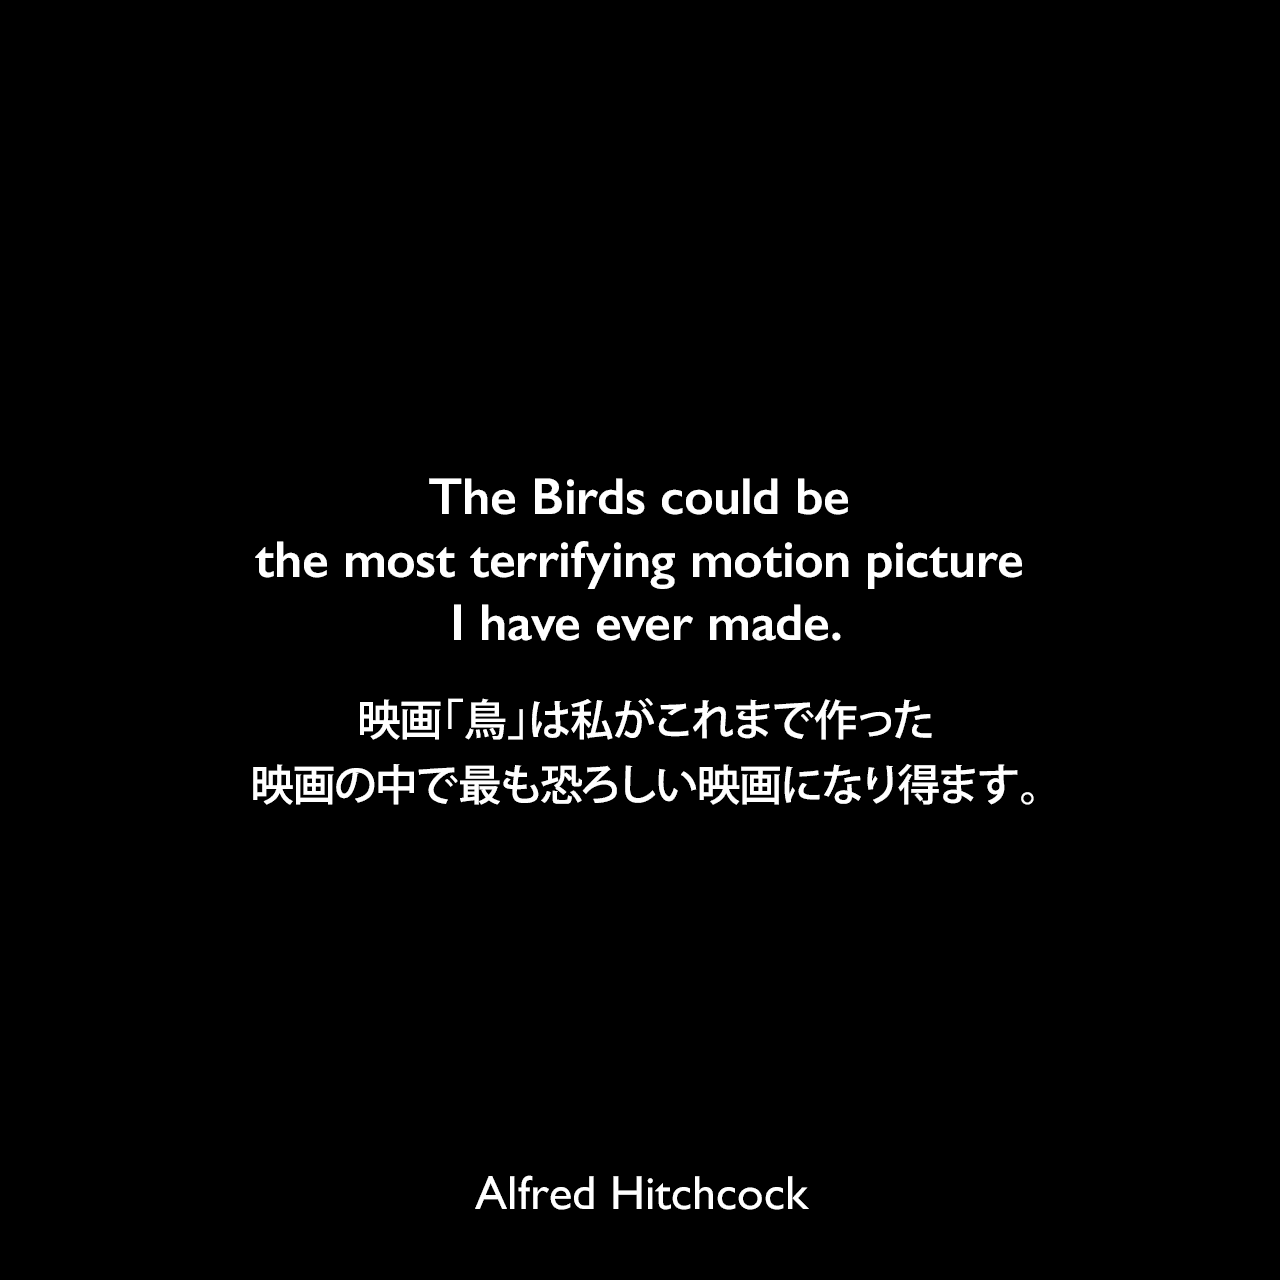 The Birds could be the most terrifying motion picture I have ever made.映画「鳥」は私がこれまで作った映画の中で最も恐ろしい映画になり得ます。- 映画「鳥」の映画予告編よりAlfred Hitchcock